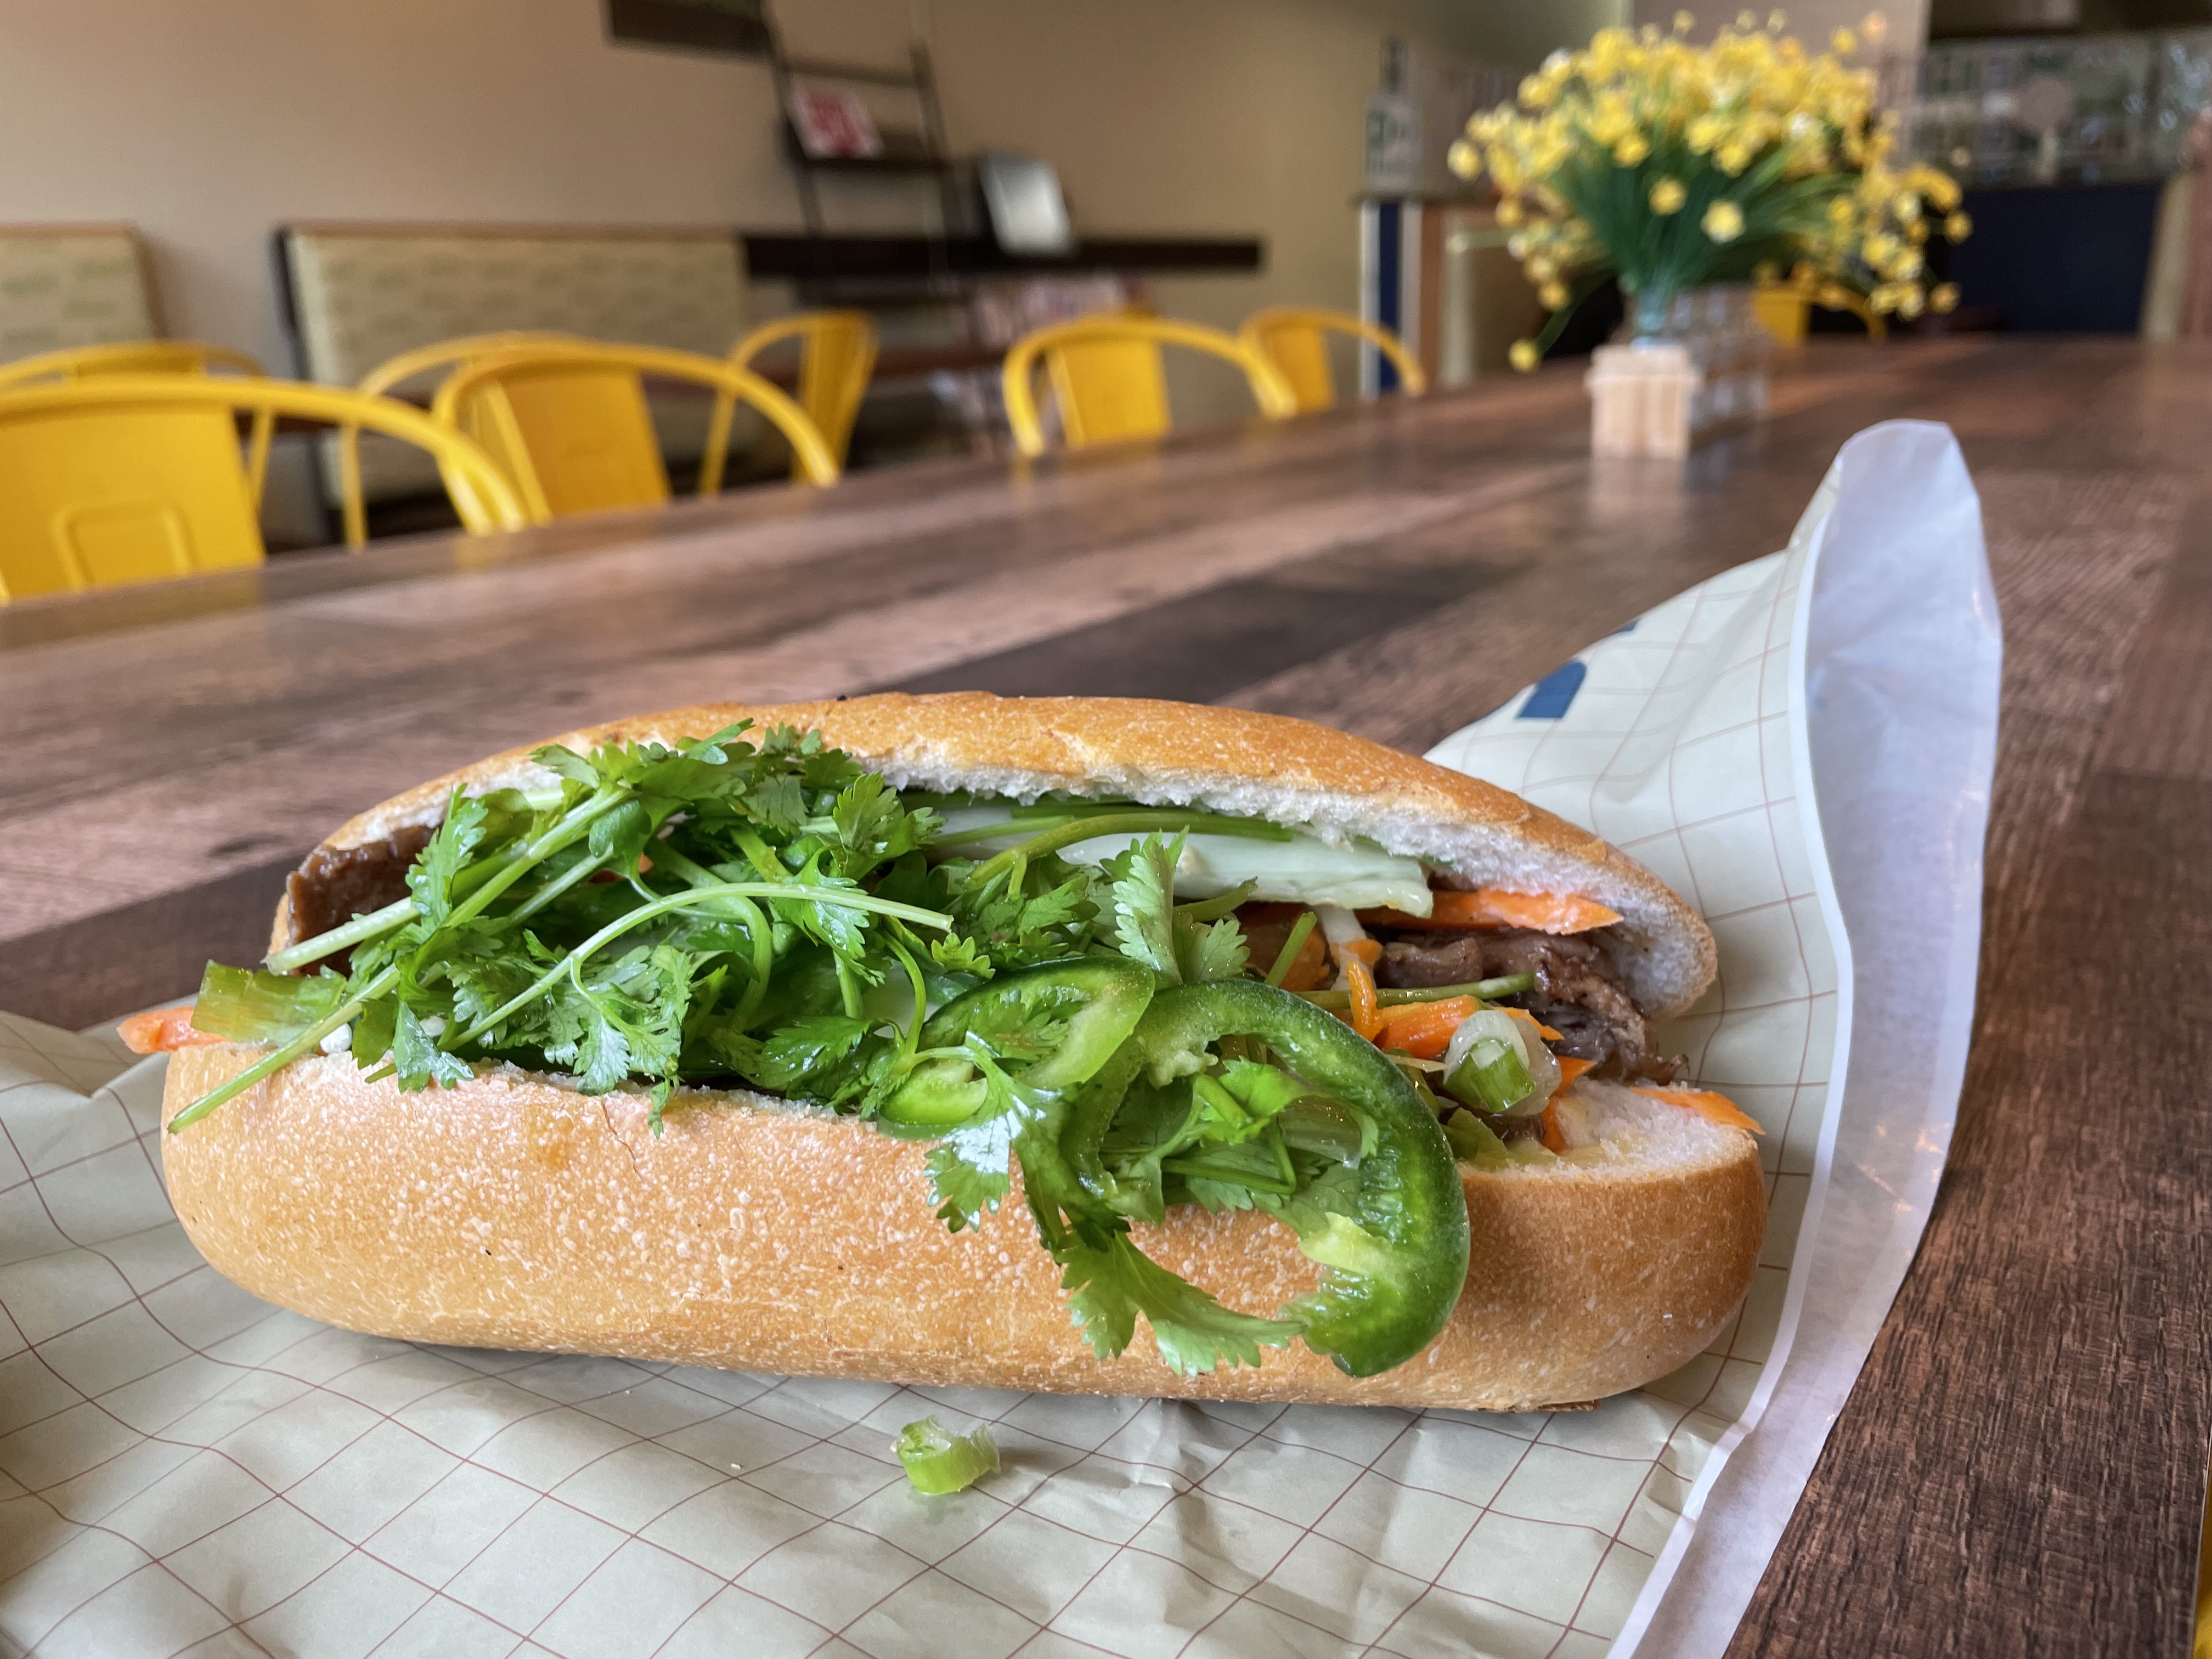 A banh mi sandwich on a wooden table with flowers and yellow chairs in the background. 